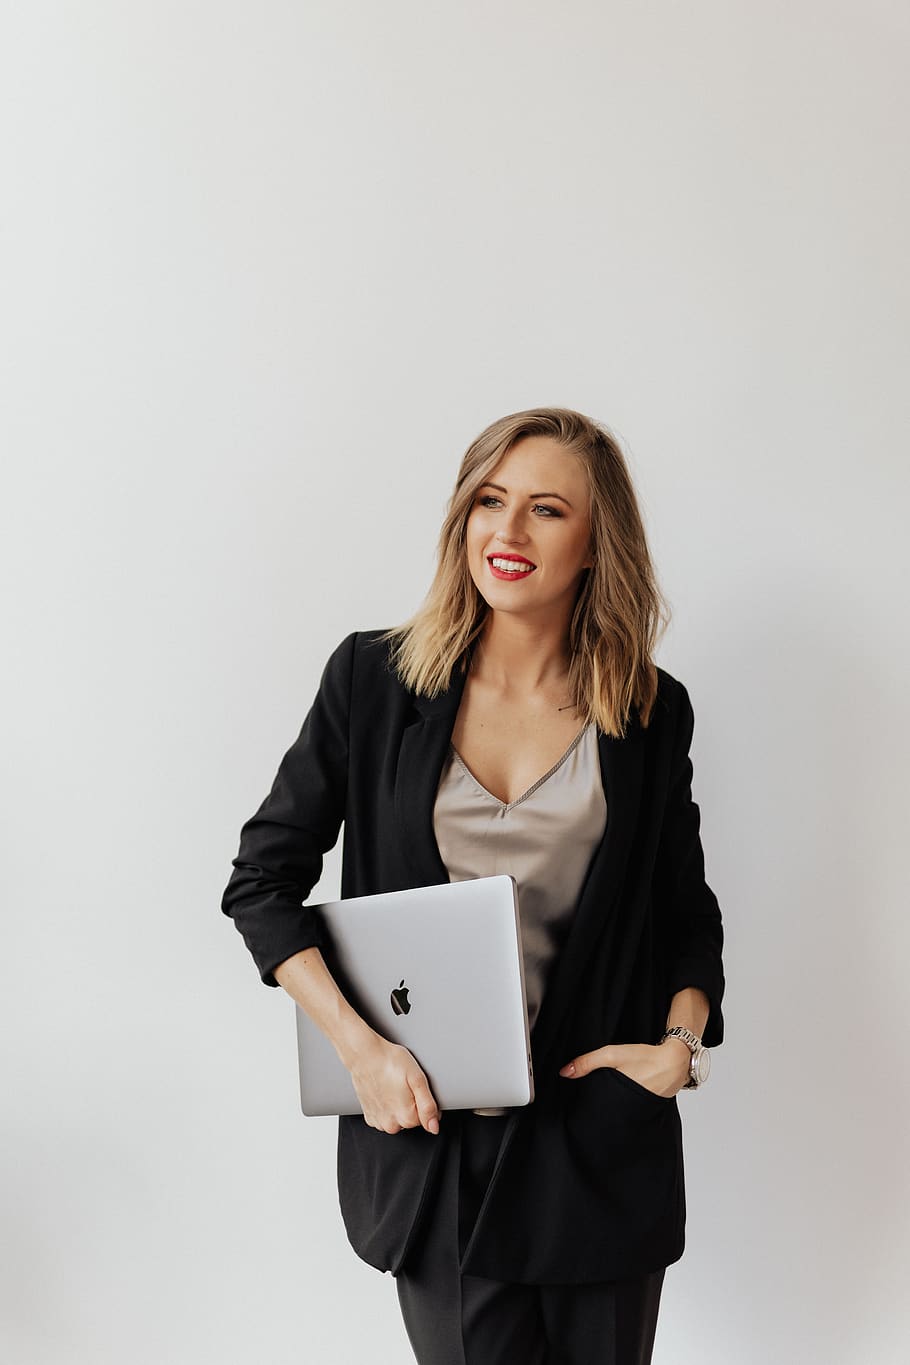 business woman, business, woman, laptop, computer, standing, blond, blonde, smile, attractive